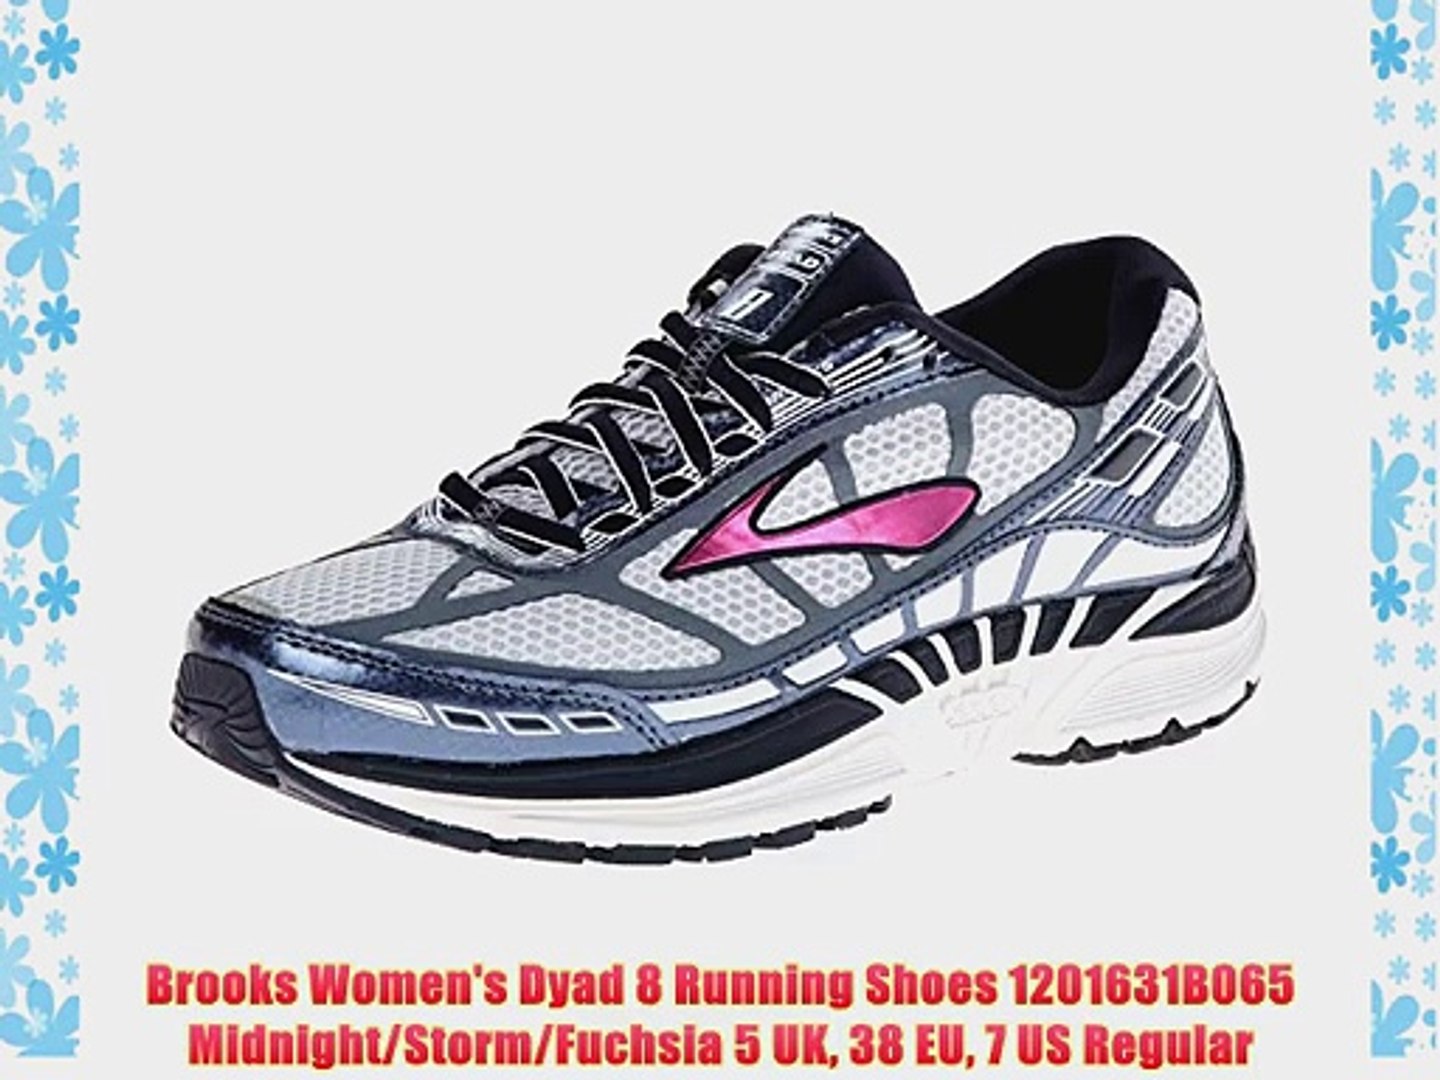 dyad 7 running shoes